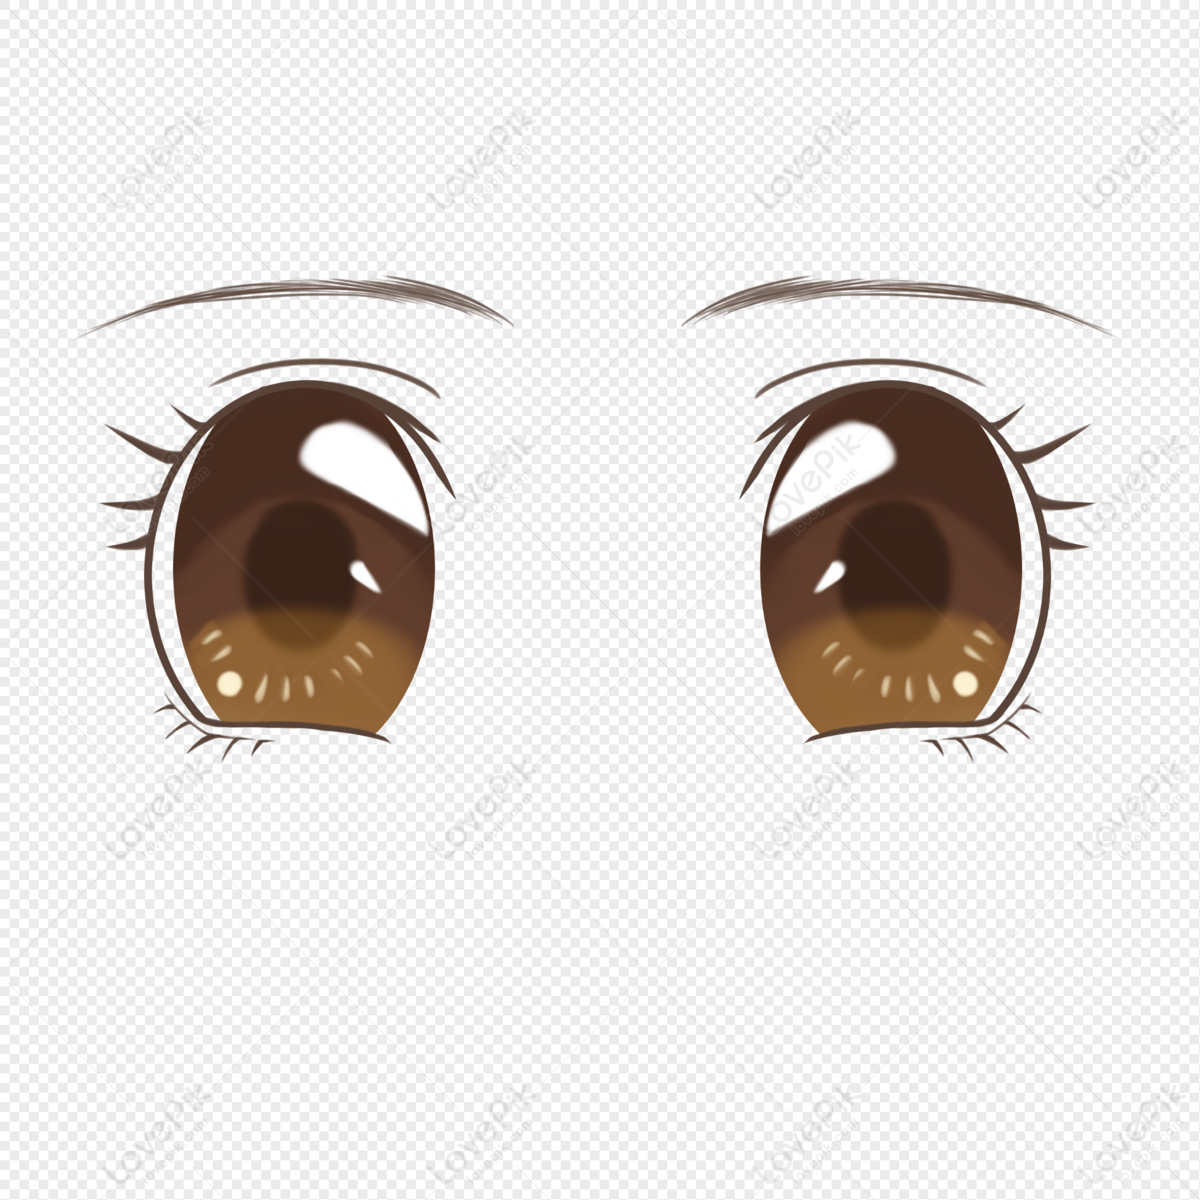 Anime Eyes Free Buckle 1 PNG Transparent Background And Clipart Image For  Free Download - Lovepik | 401229570